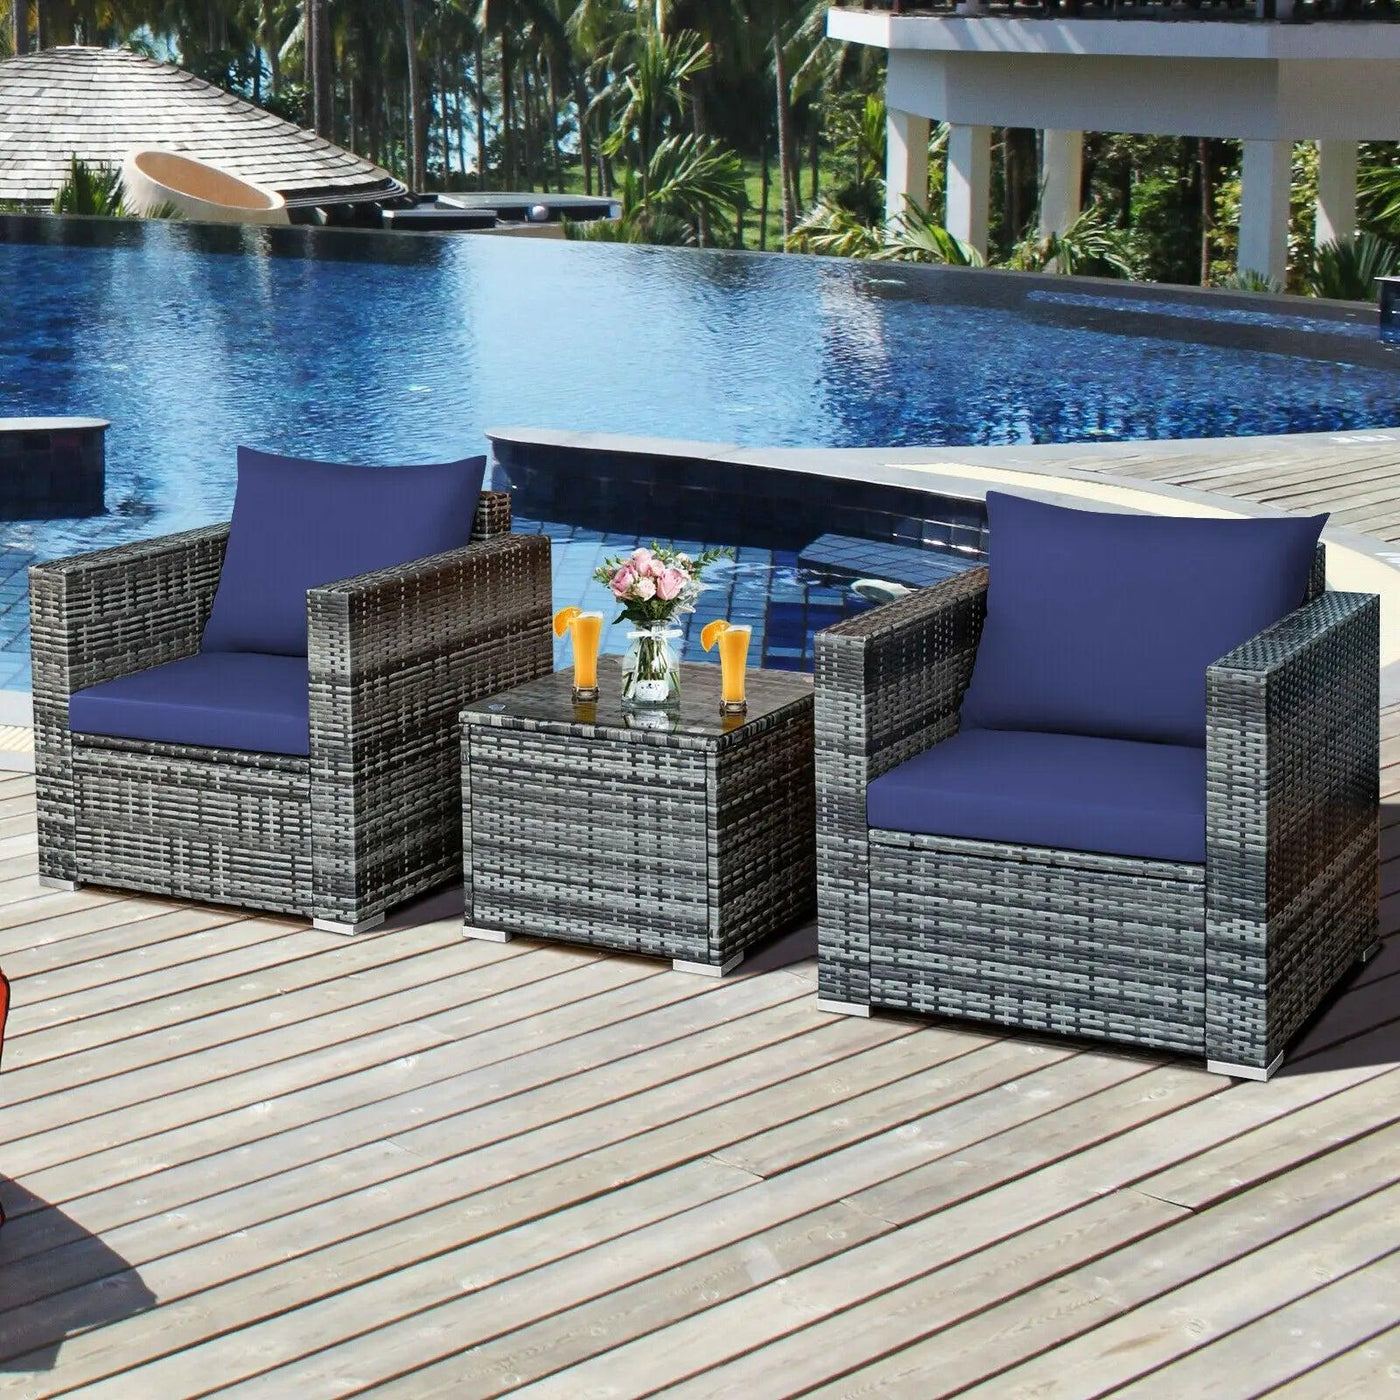 back, break, capacity, coffee, color, comes, cover, cushion, dimension, durable, easily, furniture, garden, glass, happypetssupply, have, meta, outdoor, patio, perfect, rattan, relax, save, seat, single, sofa, some, sponge, steel, sturdy, supplies, table, tabletop, tempered, time, today3, weight, which, with, zipper